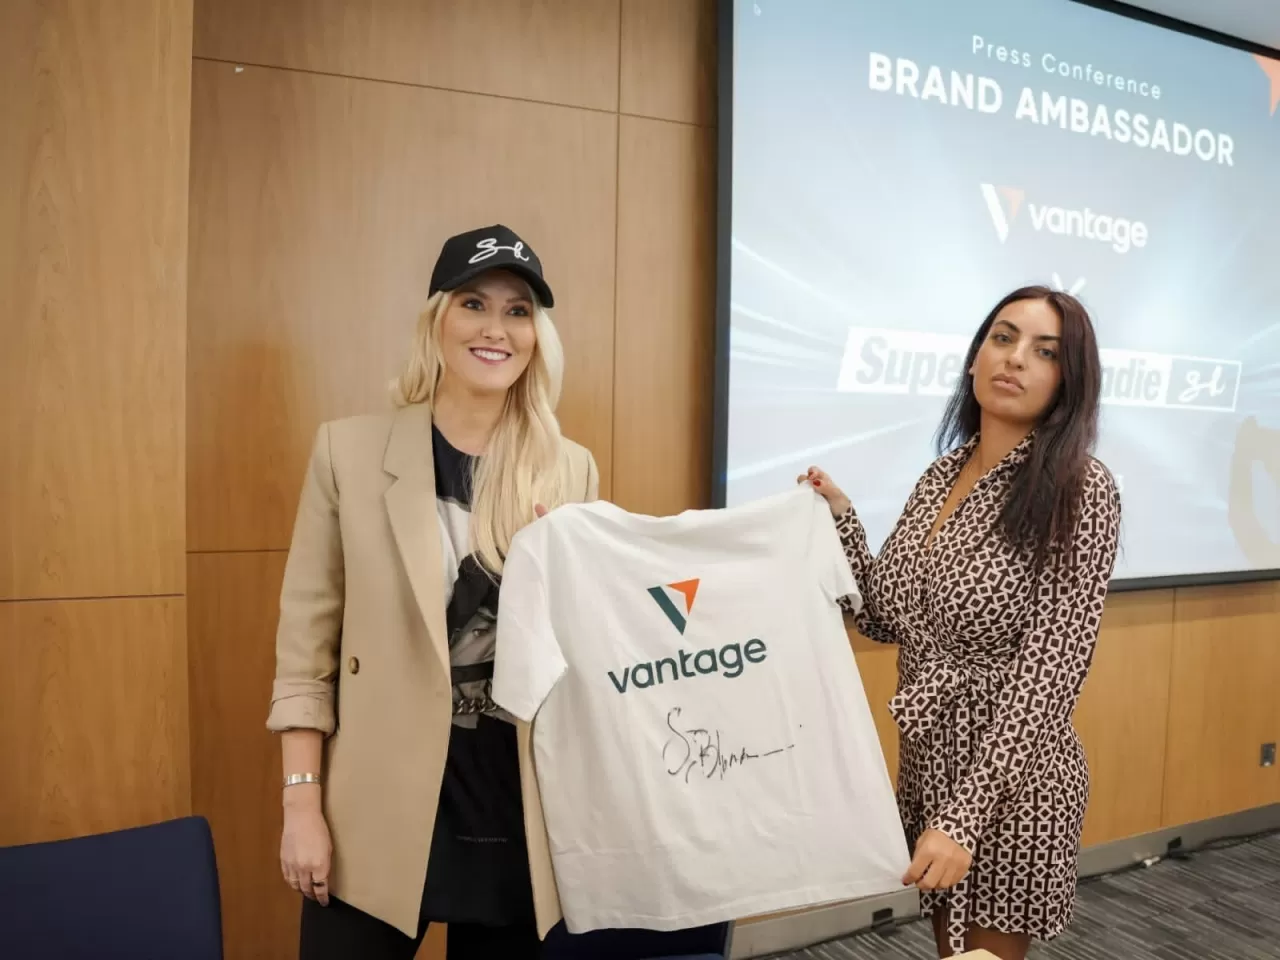 Alexandra Mary Hirschi from Supercar Blondie, and Nadine Azzam, Head of MENA for Vantage, at the signing ceremony and press conference held on 18 January in Dubai. img#1